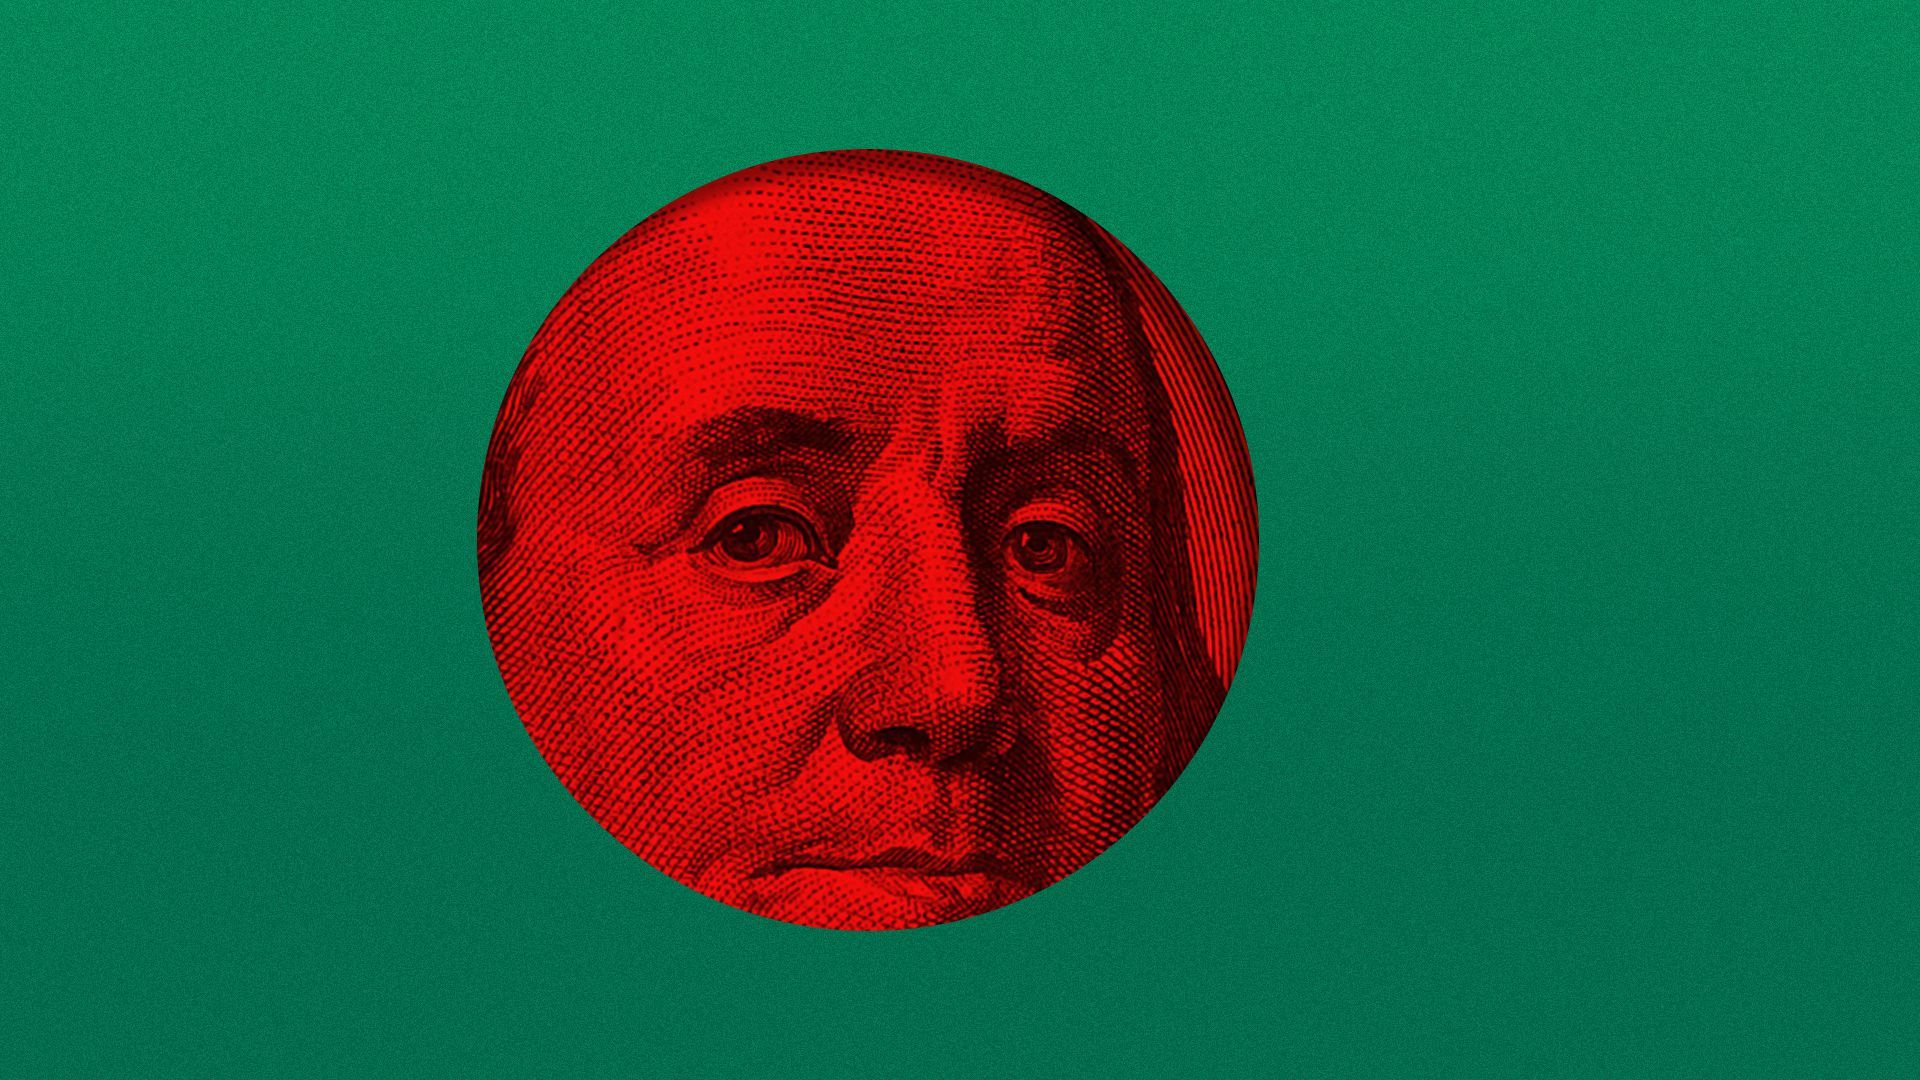 Illustration of the flag of Bangladesh with a hundred dollar bill in the center 